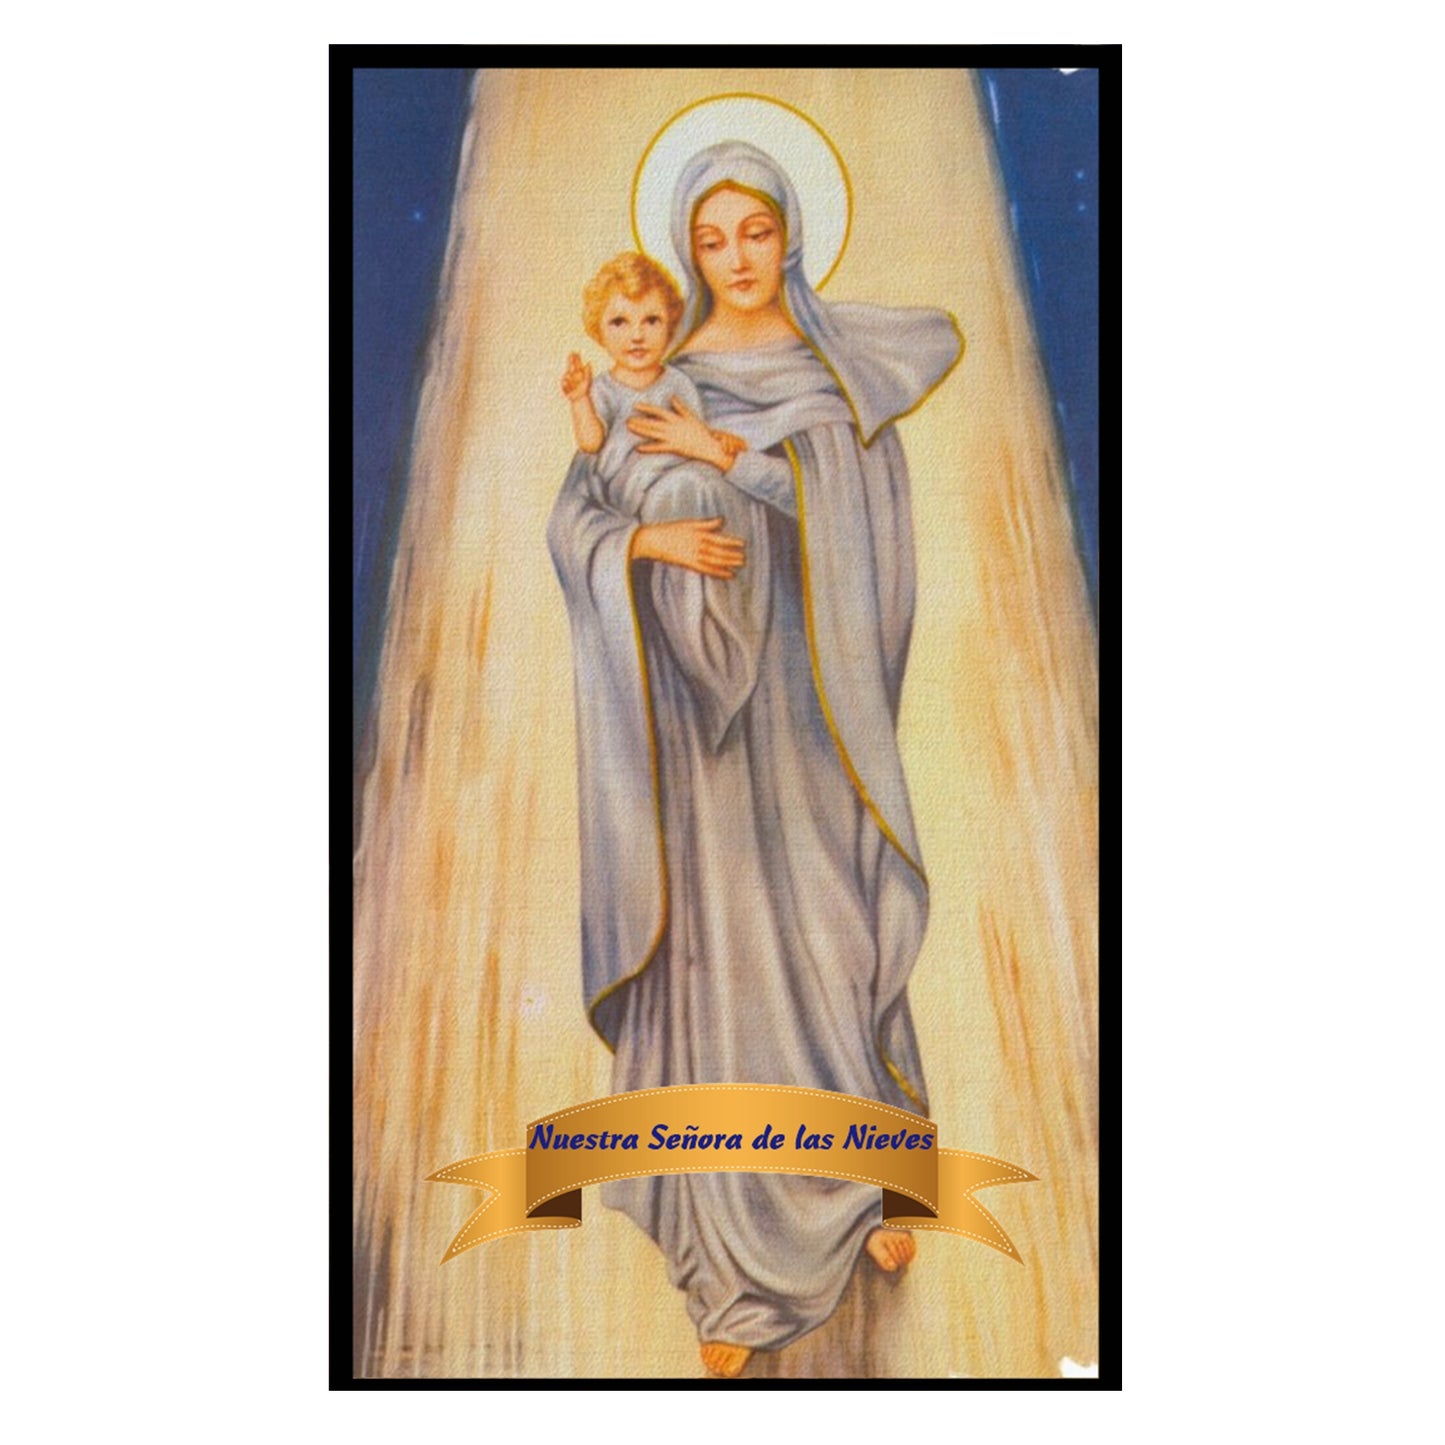 Our Lady of the Snows Patron Saint of The island of La Palma Card Medal and Chain